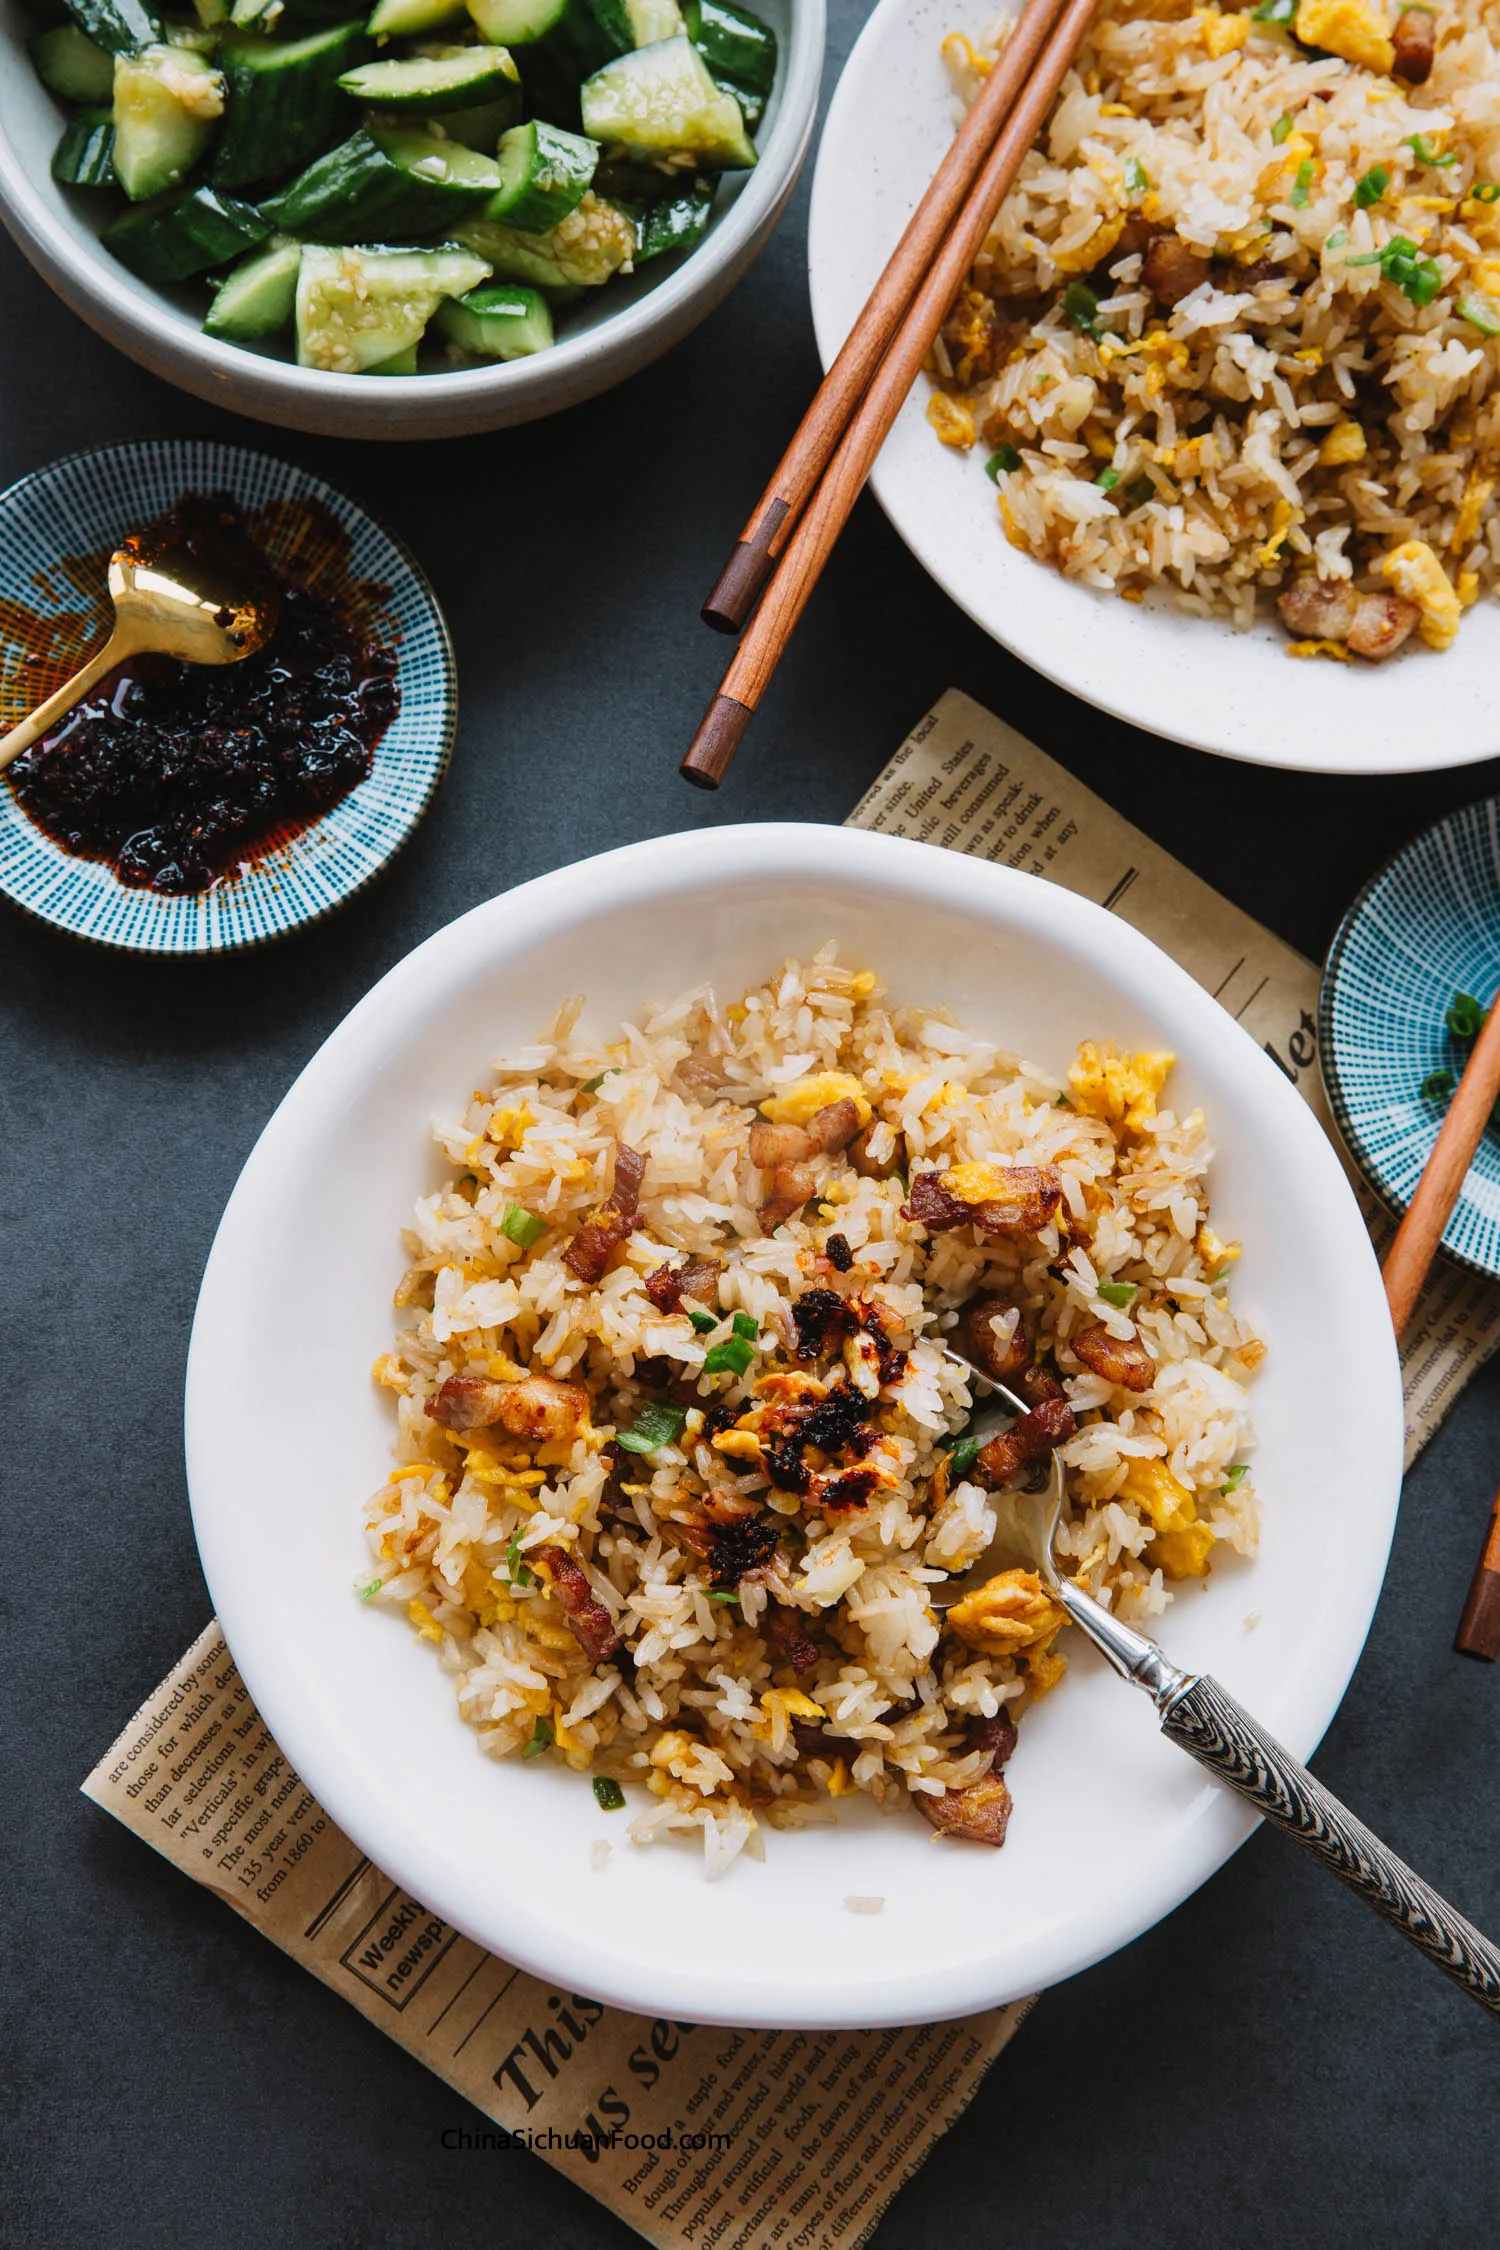 Pork belly fried rice|chinasichuanfood.com